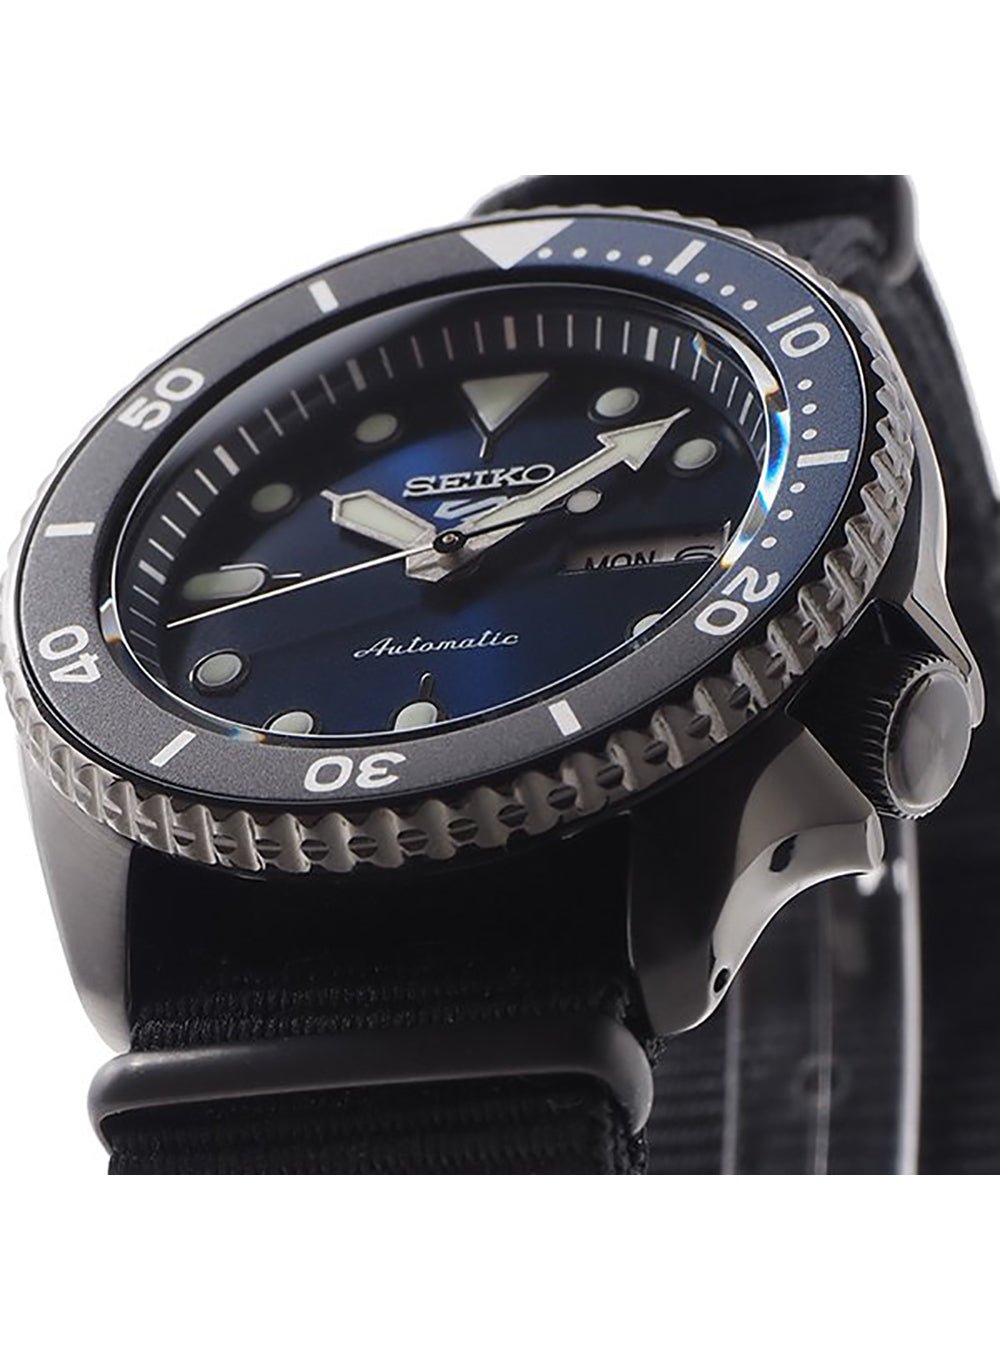 SEIKO 5 SPORTS SBSA099 ONLINE SHOP LIMITED MADE IN JAPANWRISTWATCHjapan-select